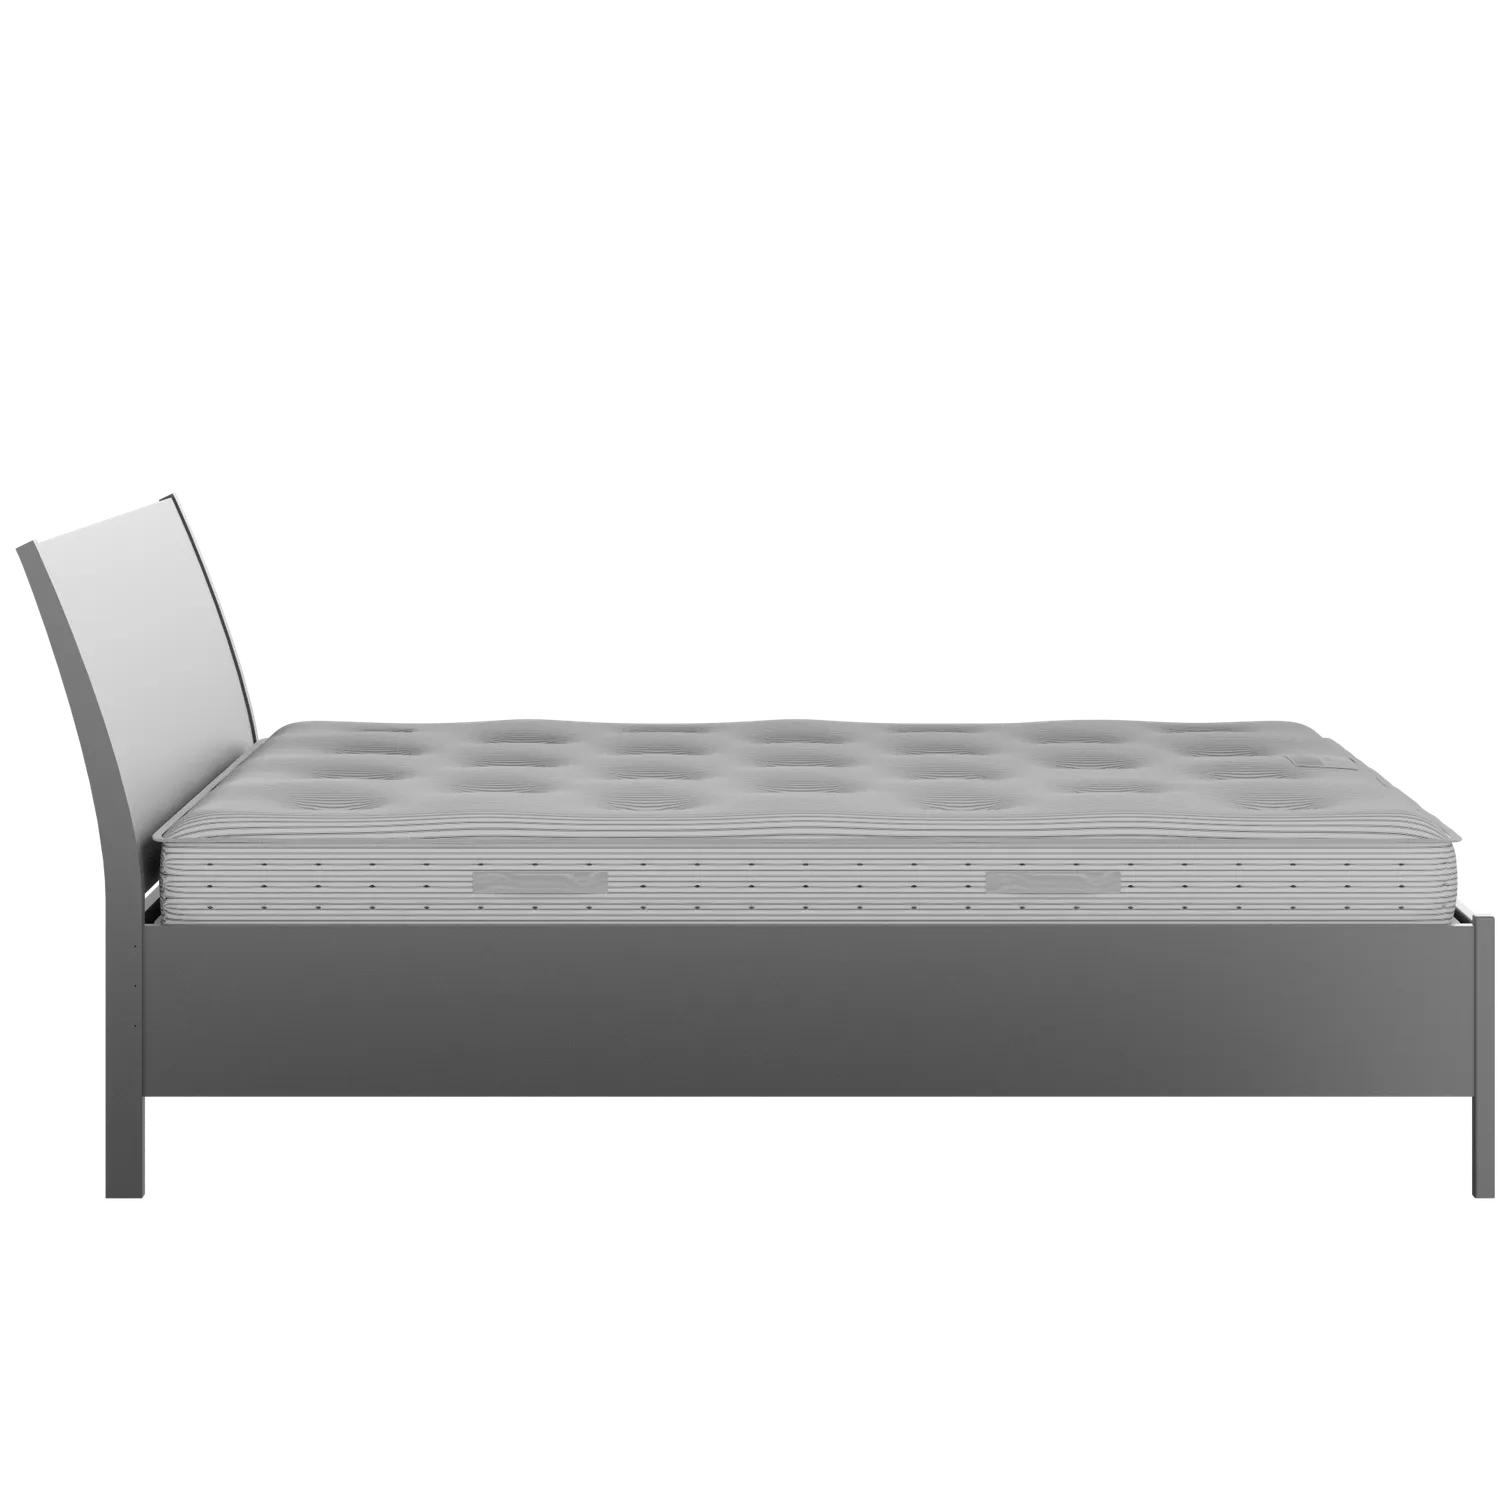 Hunt Painted painted wood bed in grey with Juno mattress